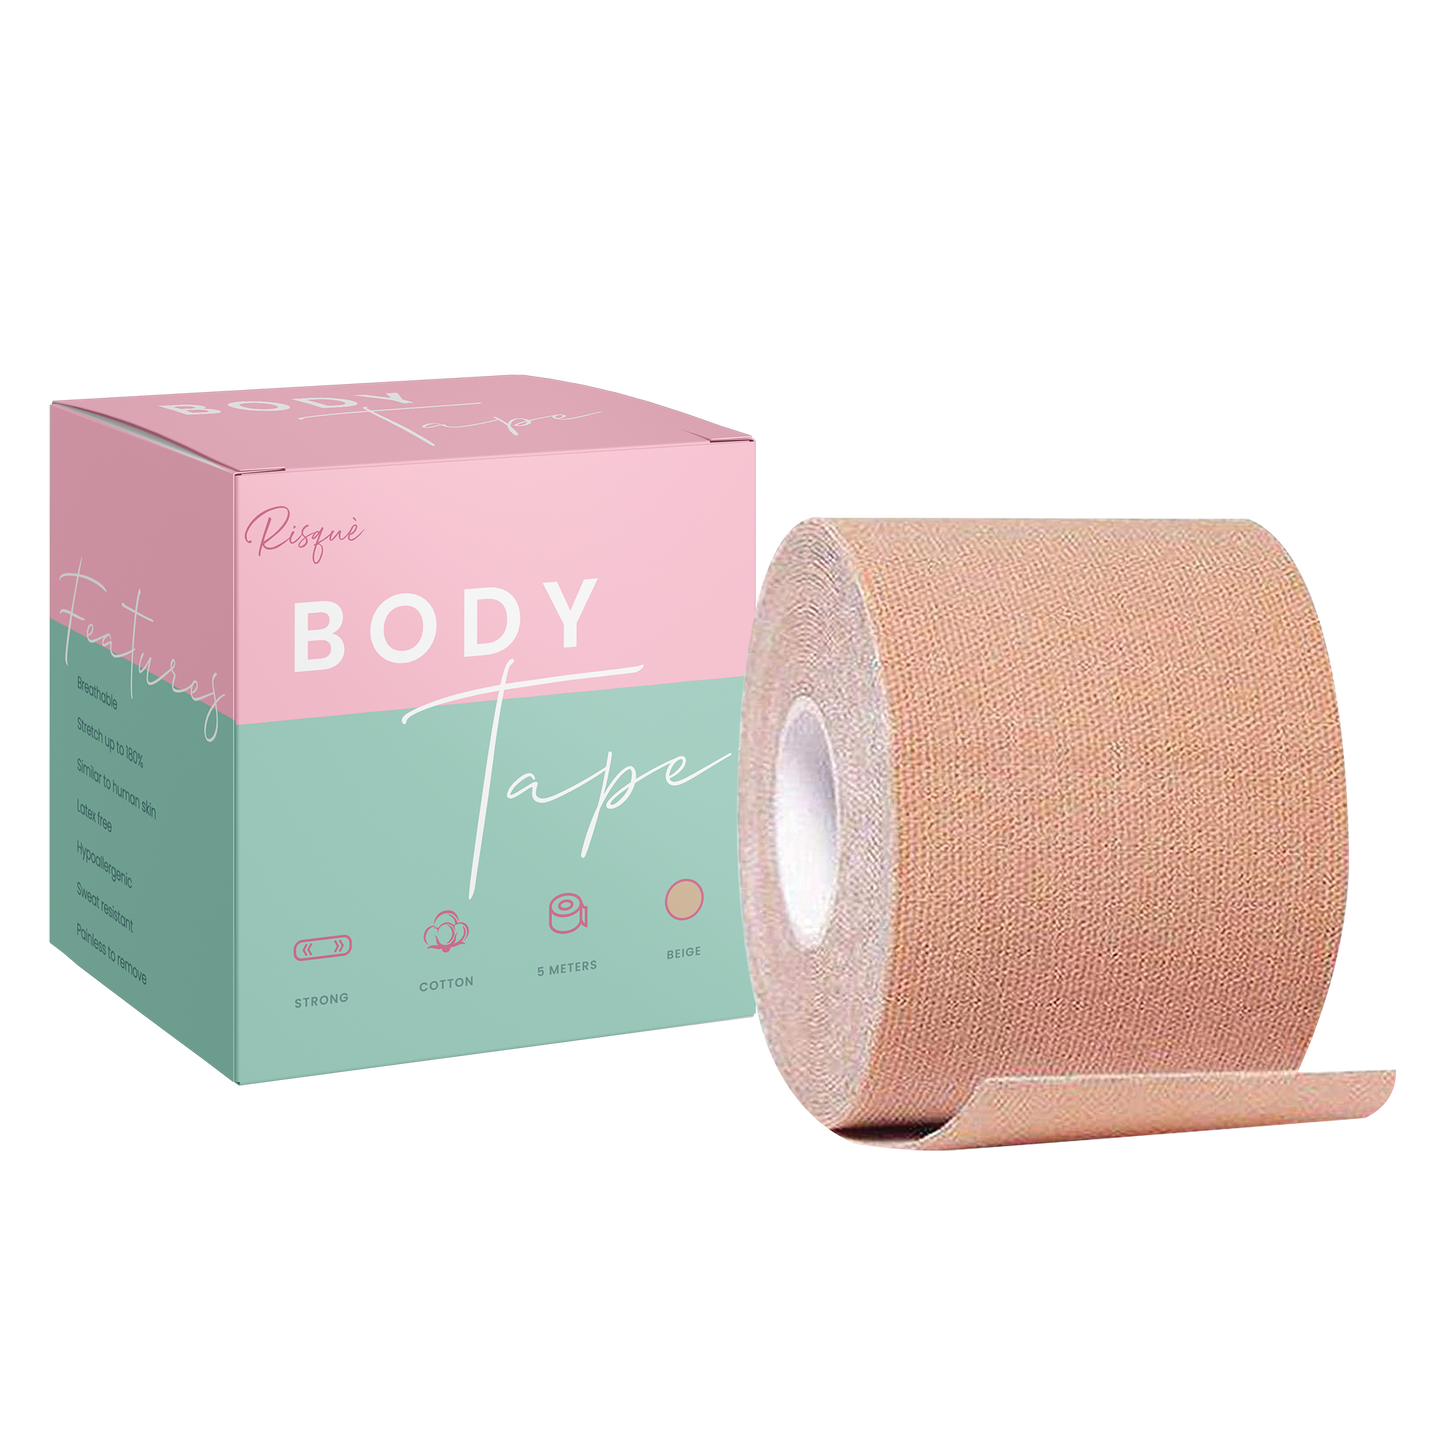 Boob Tape Boobytape Breathable Breast Support Tape Sticky Body